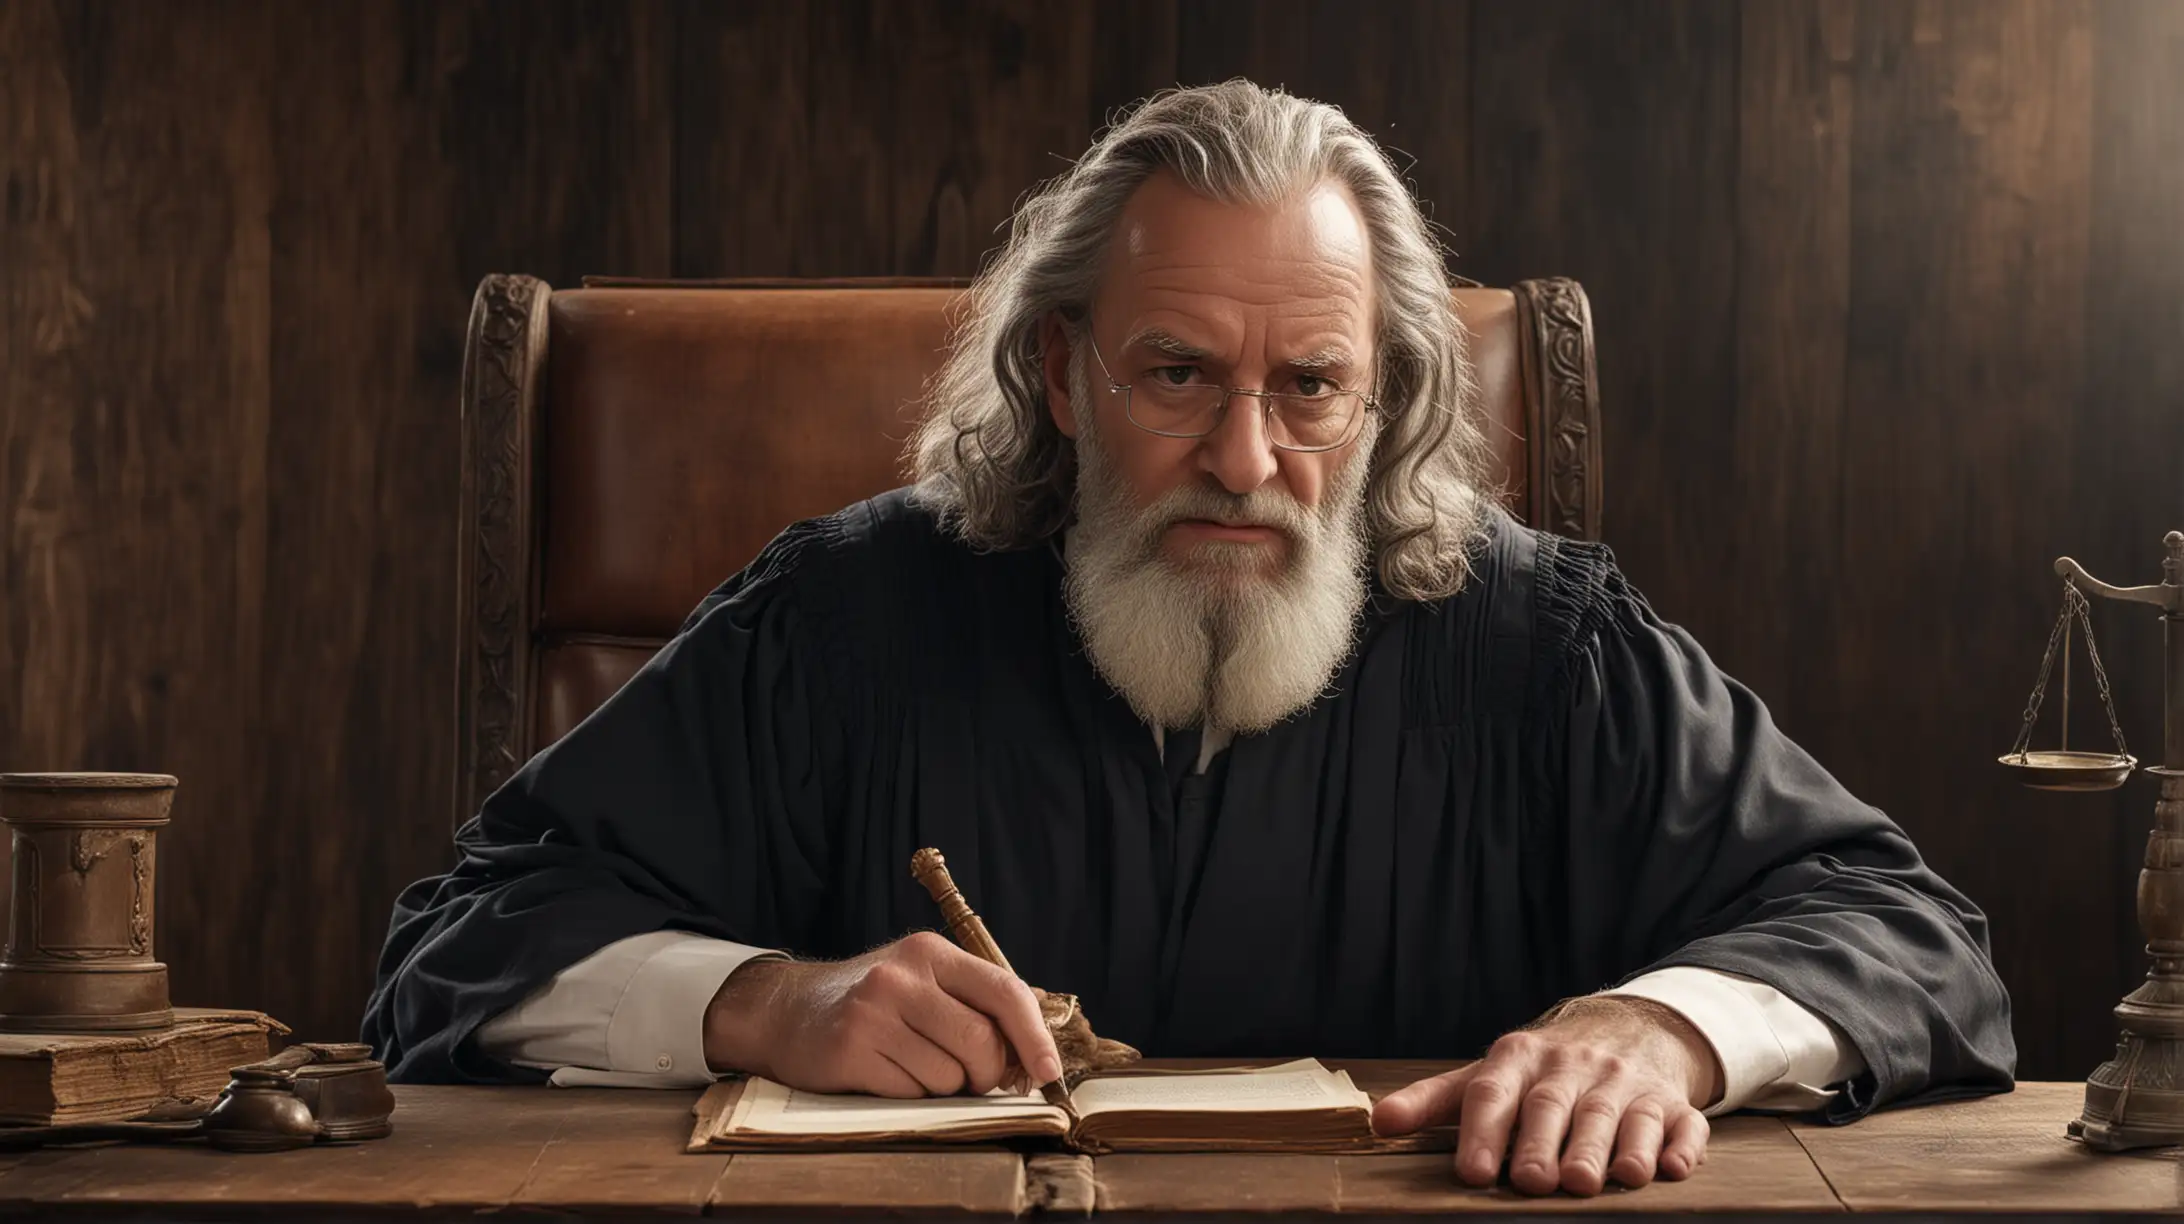 Biblical Moses Era Serious Male Judge at Old Wooden Desk